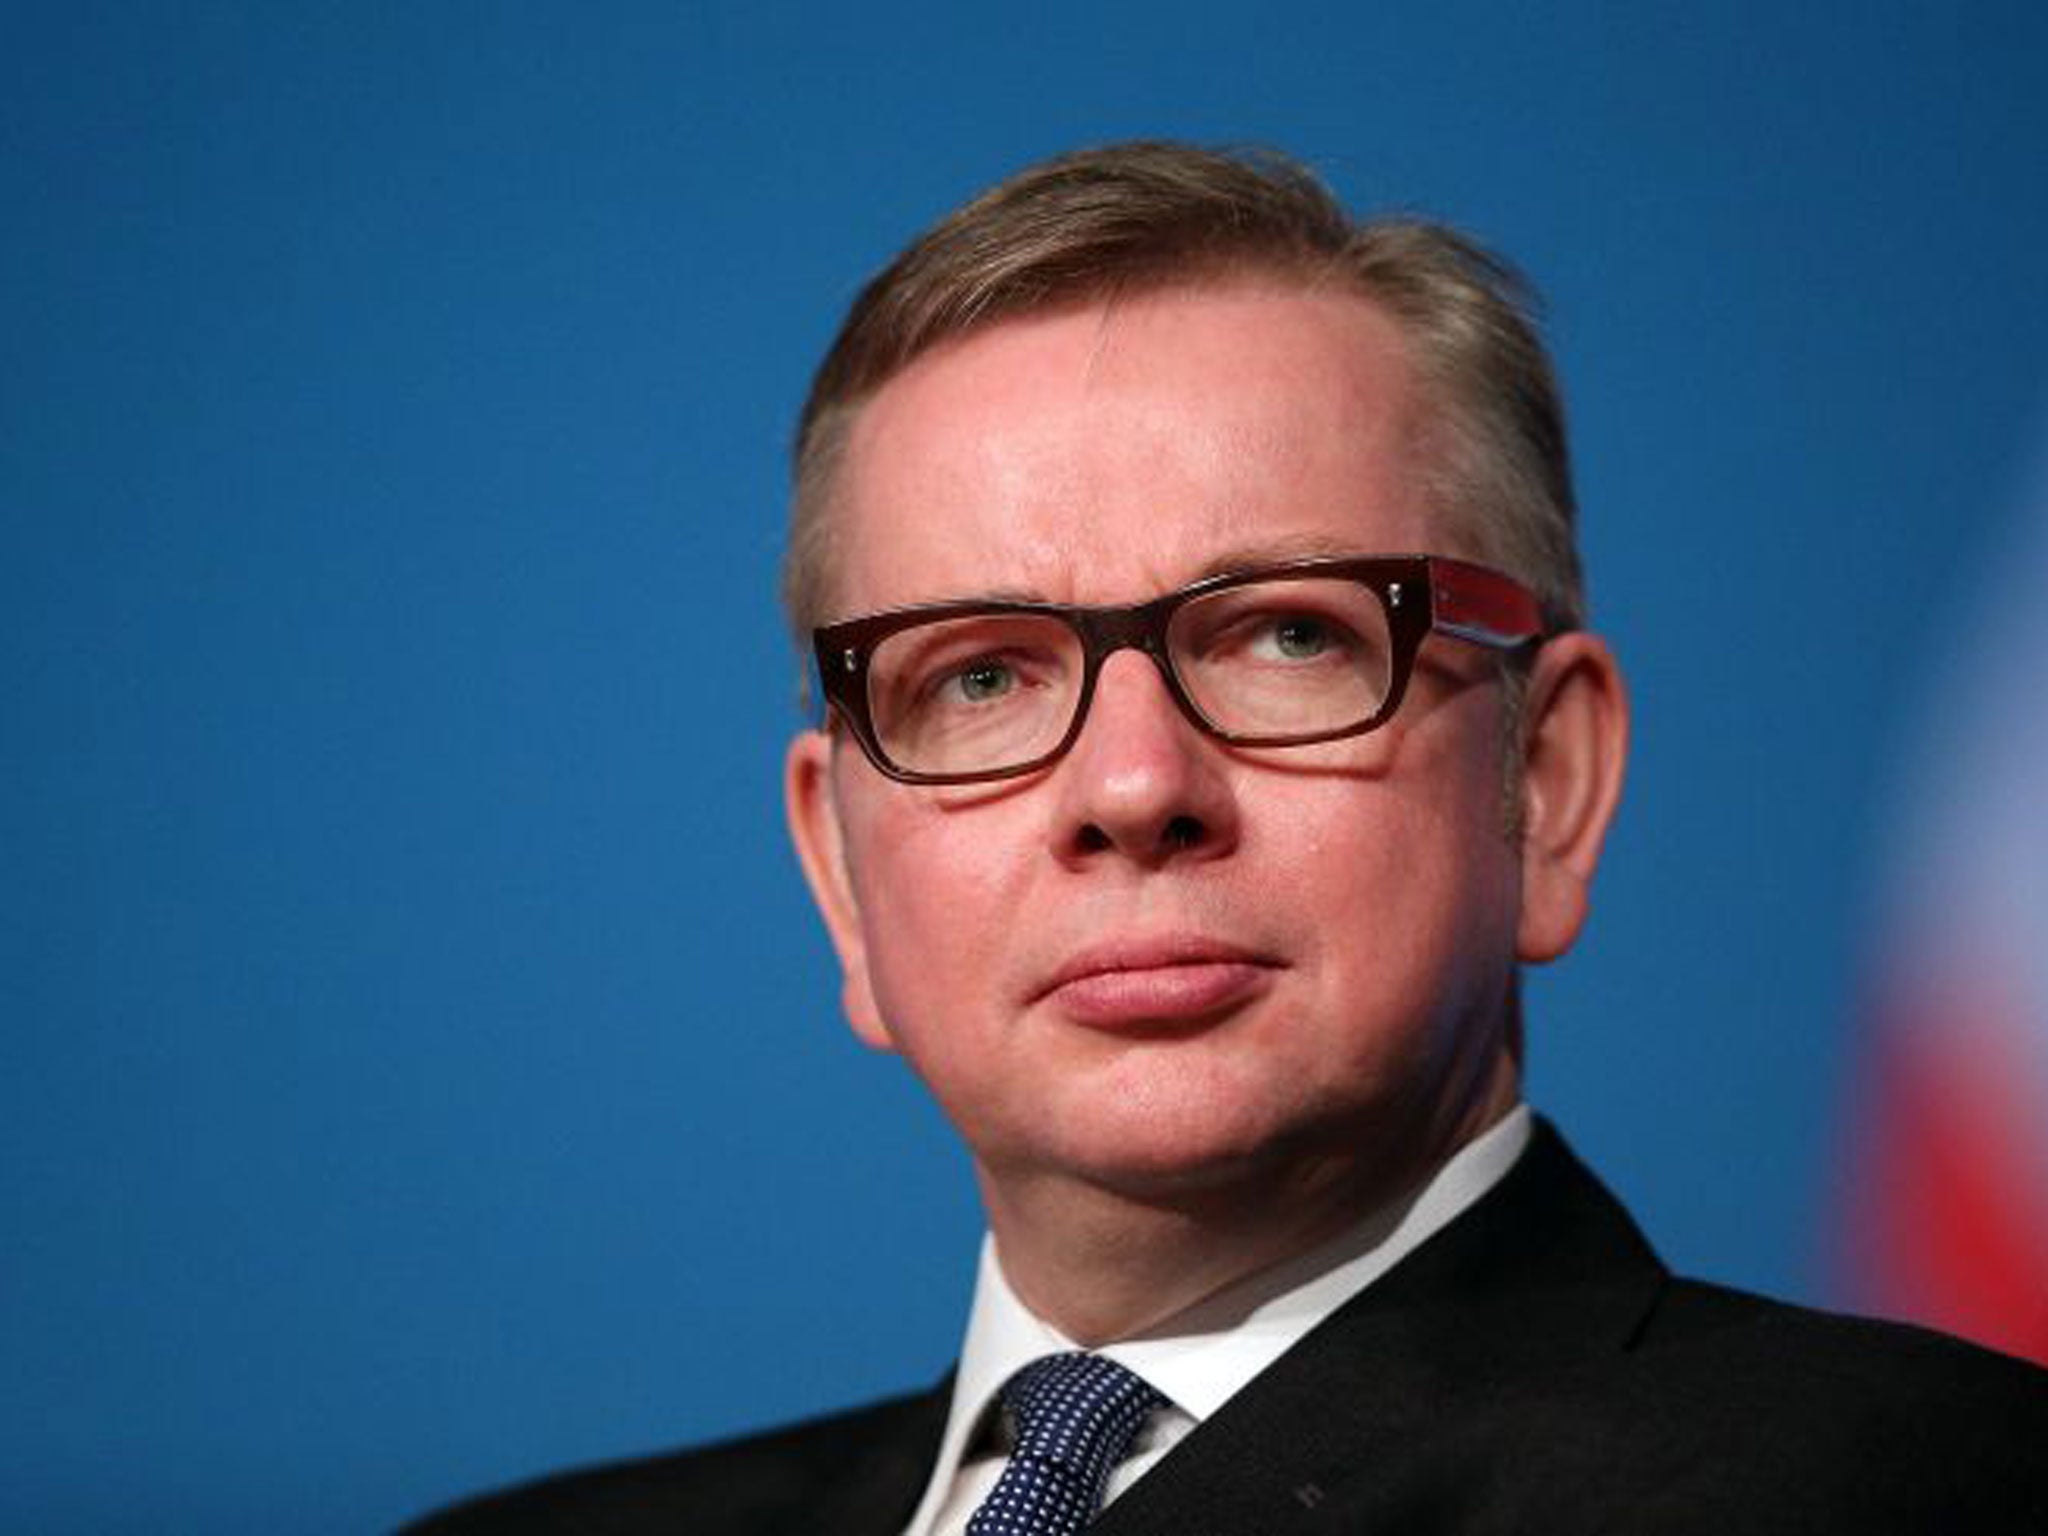 James Frayne and Dominic Cummings are said to have created a ‘them and us’ atmosphere inside Michael Gove’s Department for Education